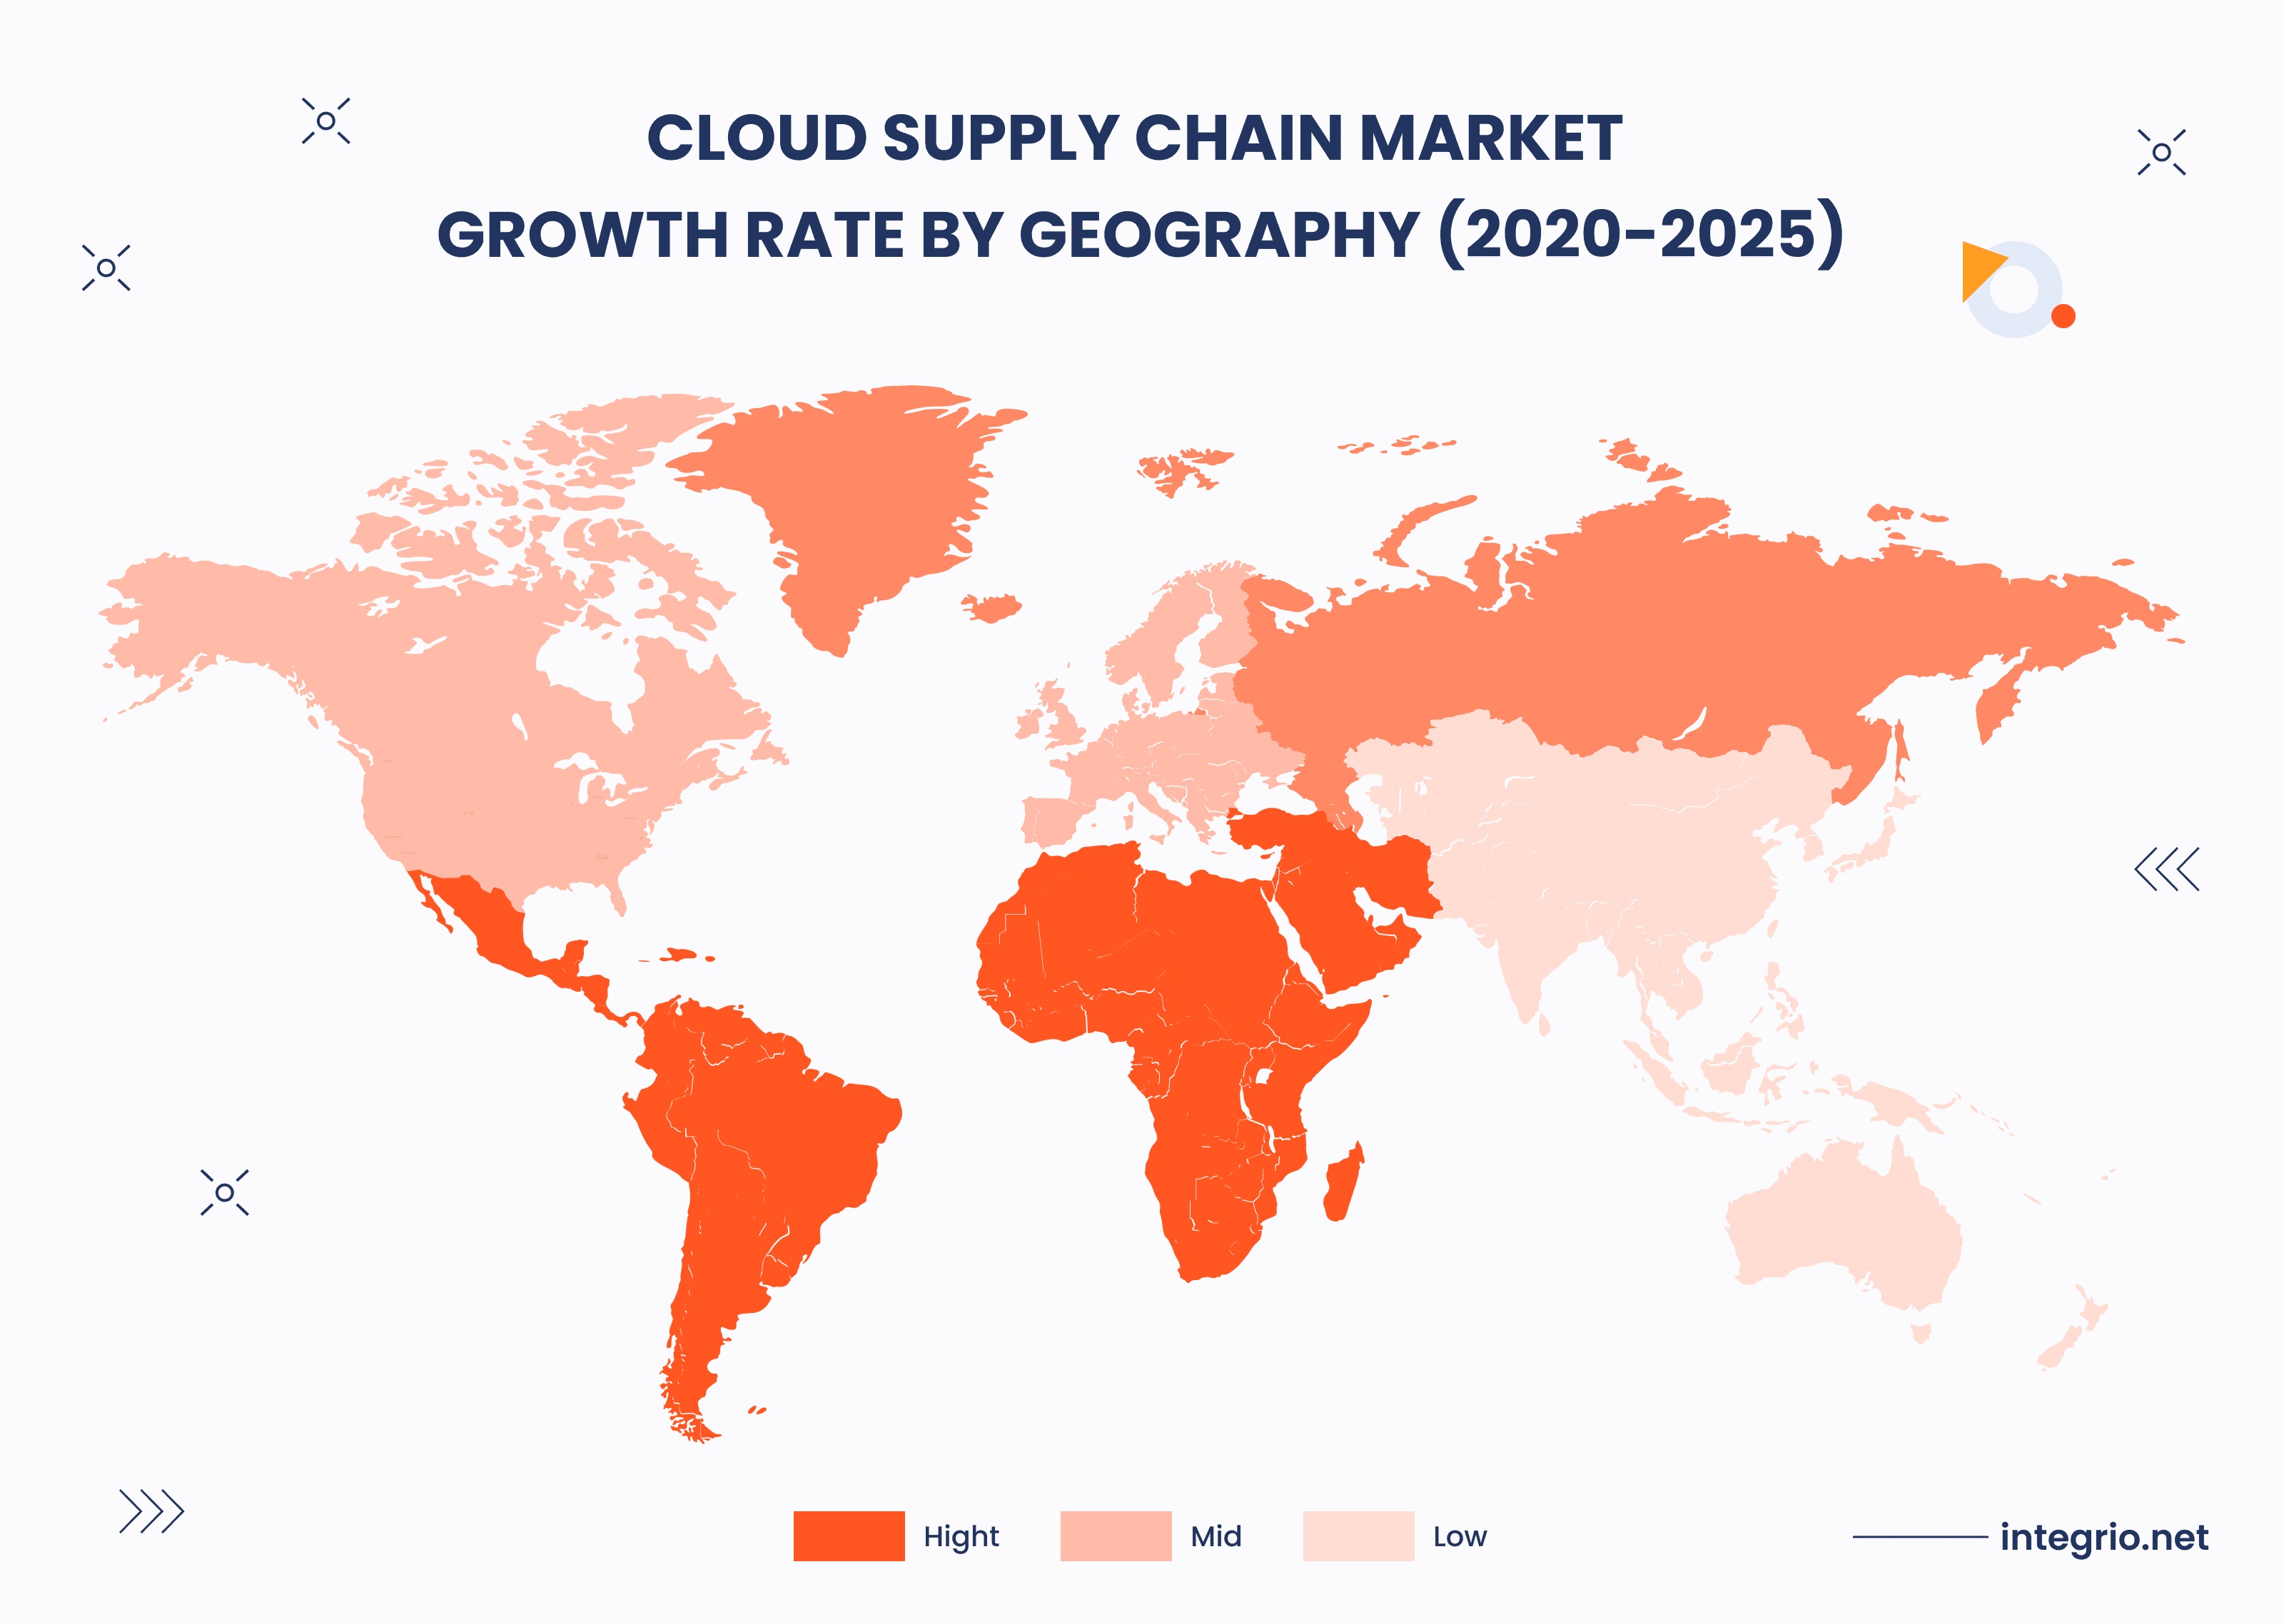 Cloud Supply Chain Market - Growth Rate by Geography (2020-2025)